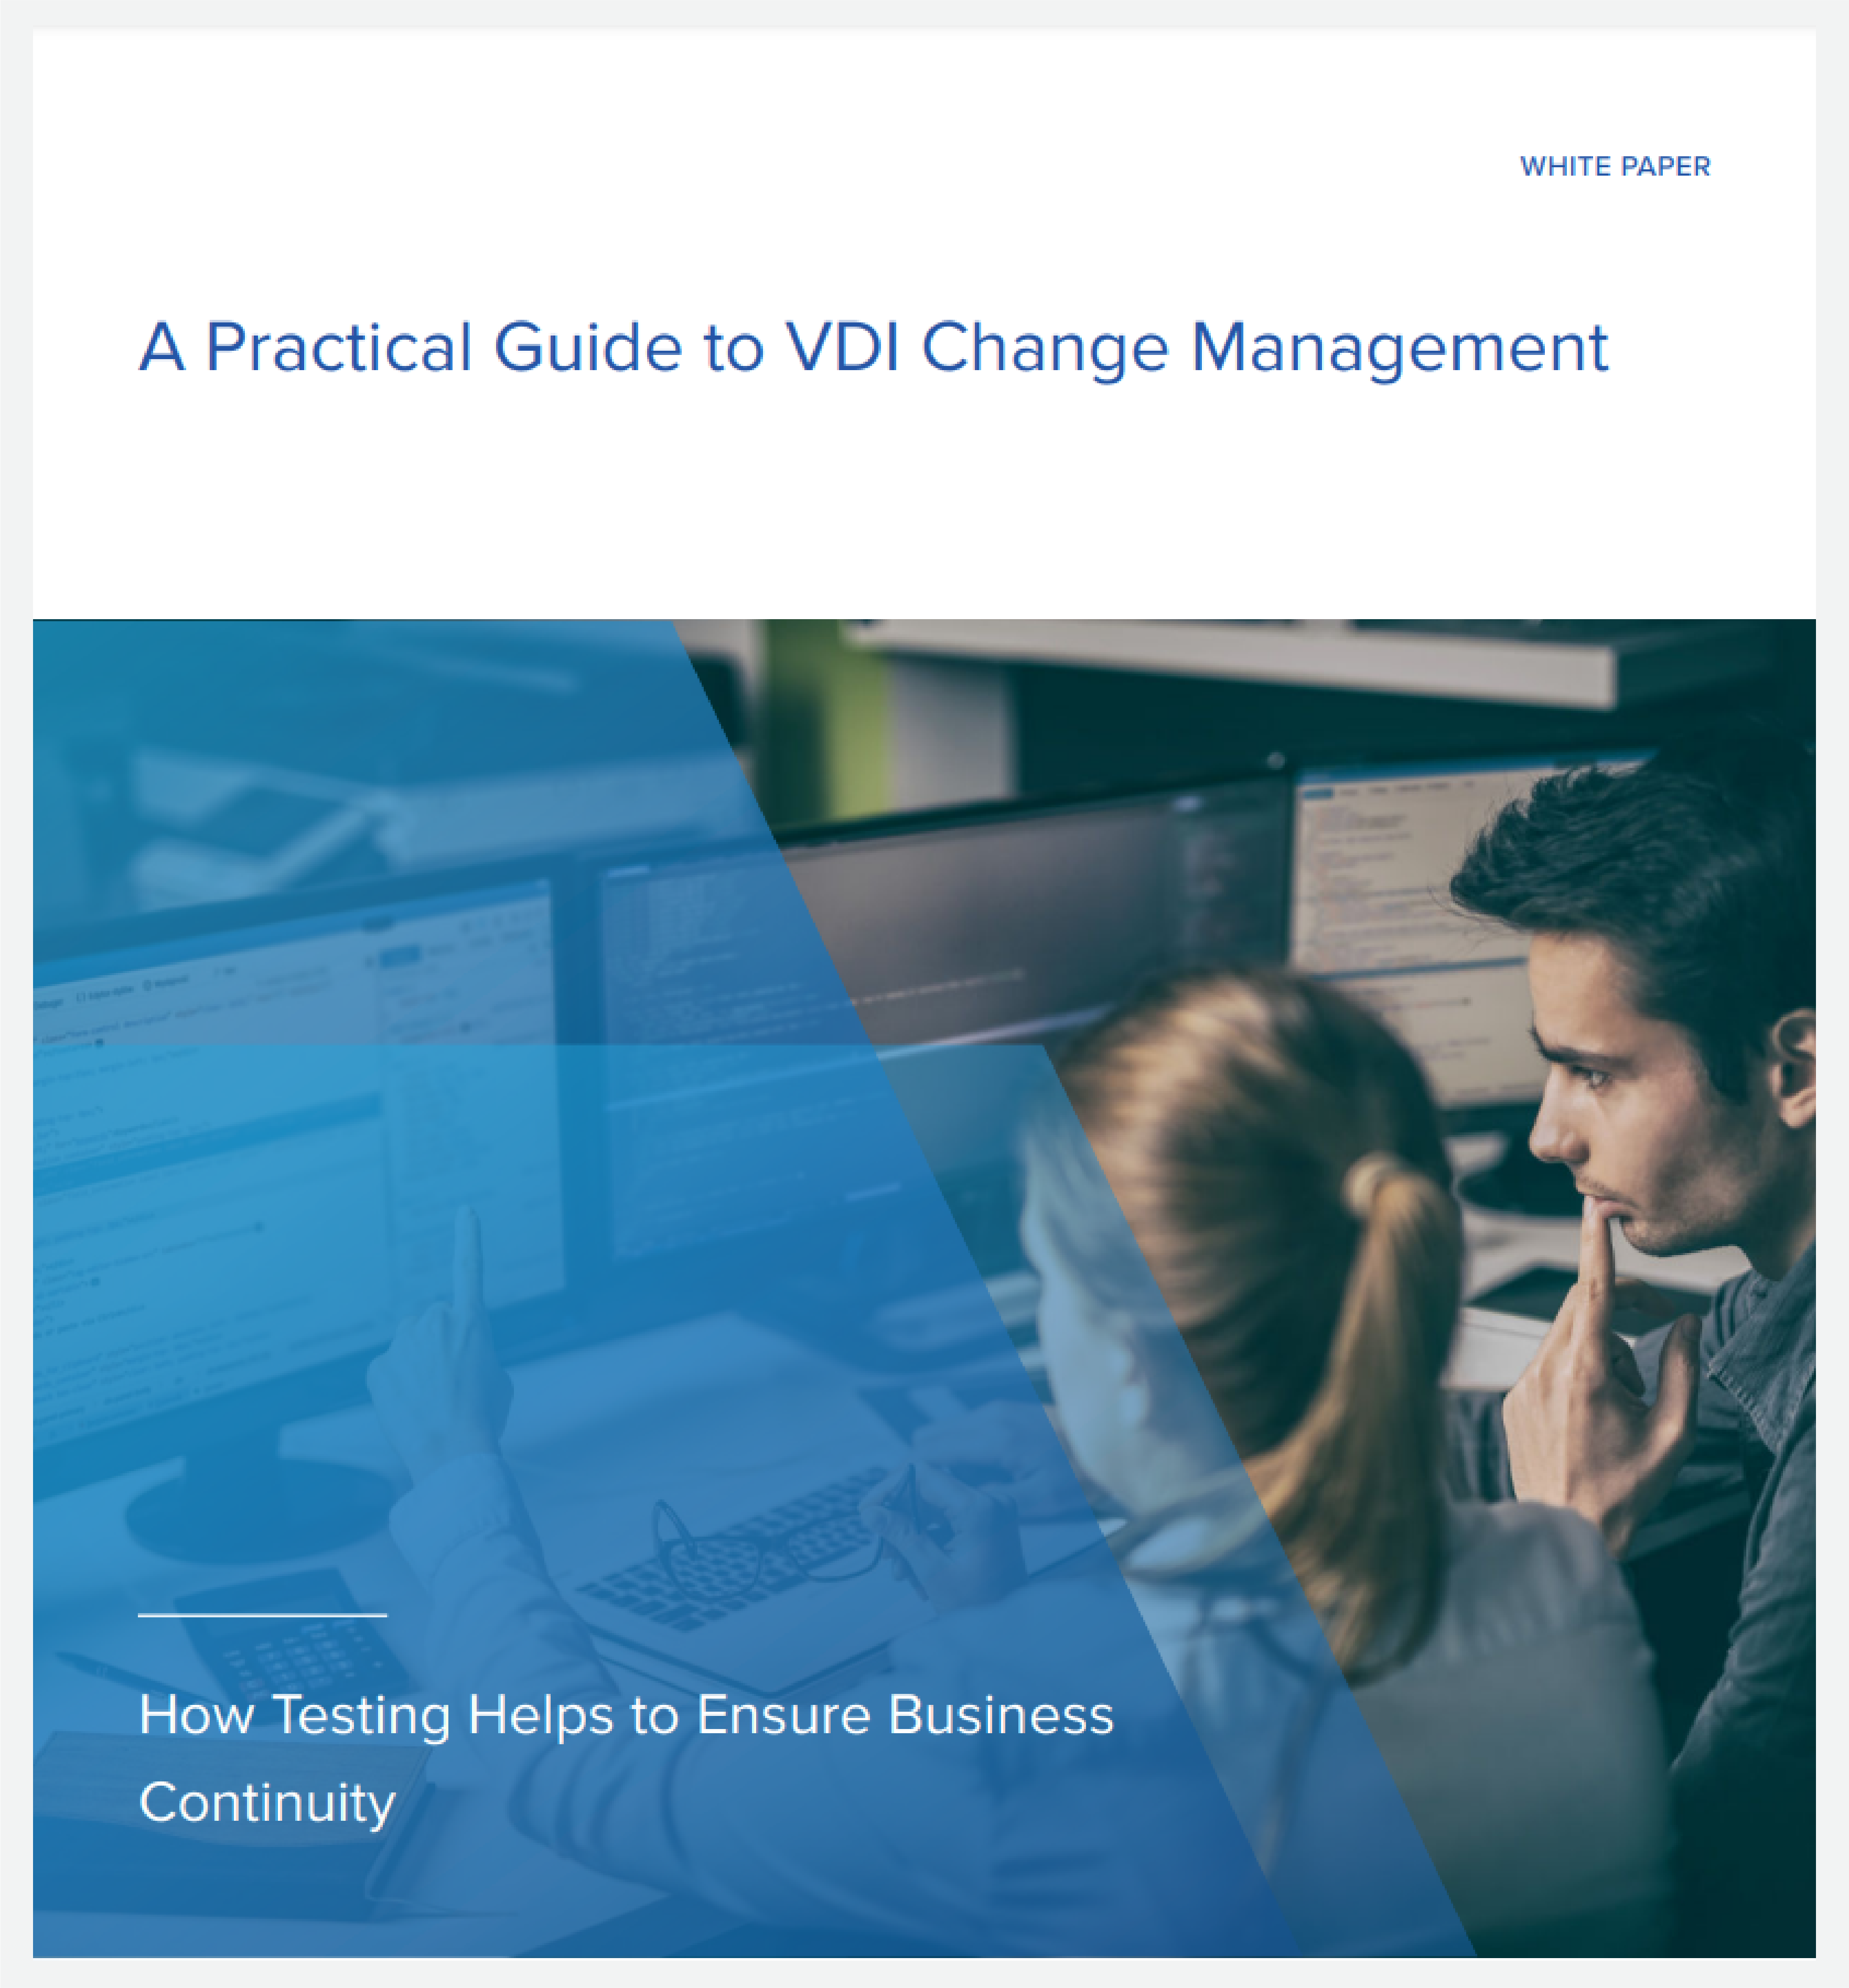 A Practical Guide to VDI Change Management